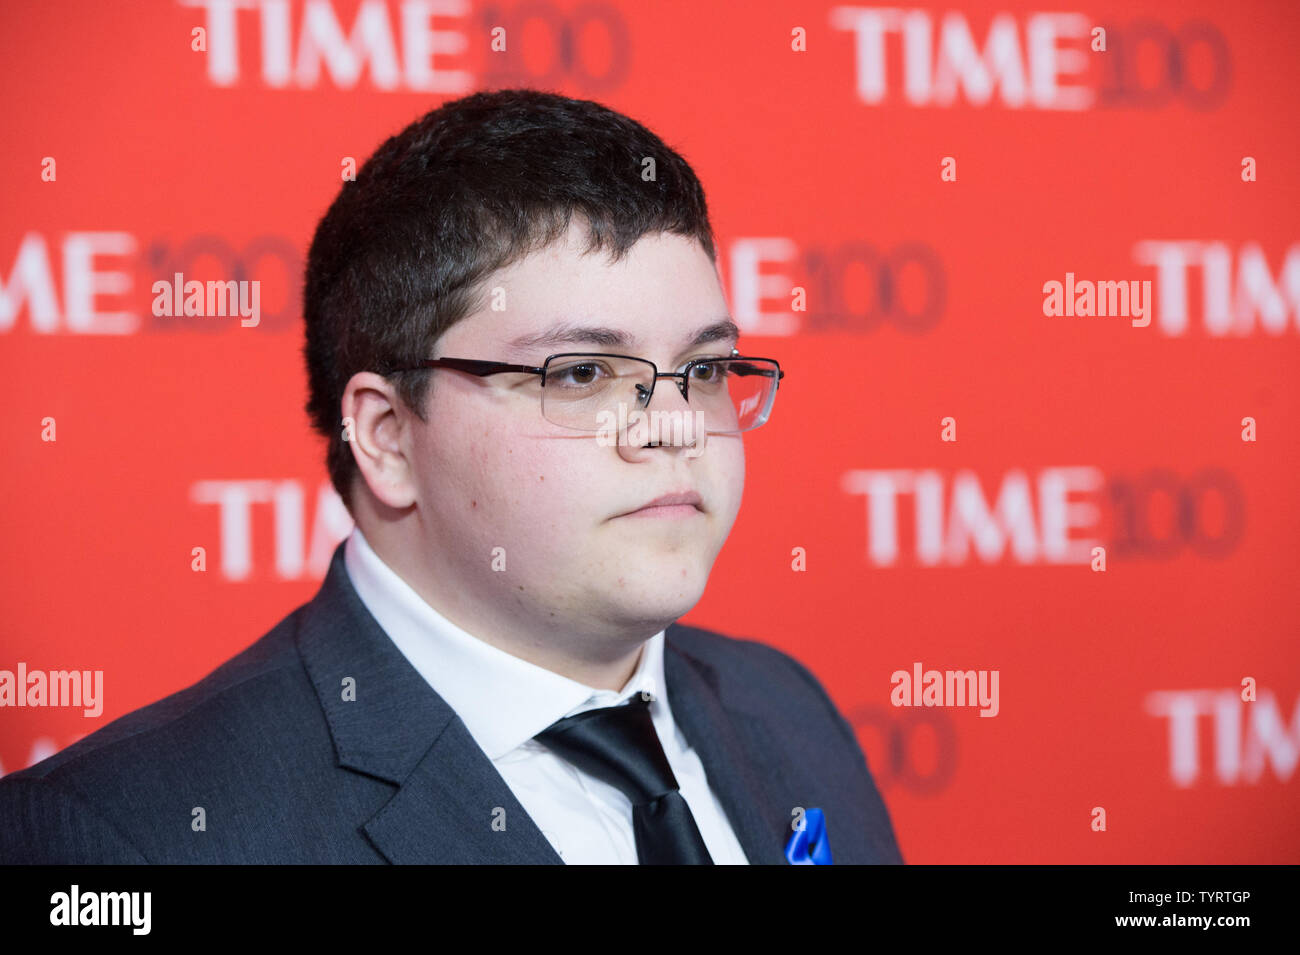 Gavin Grimm arrives on the red carpet at the TIME 100 Gala at Frederick P. Rose Hall, Home of Jazz at Lincoln Center, in New York City on April 26, 2017. TIME 100 celebrates TIME Magazine's list of the 100 Most Influential People in the World.      Photo by Bryan R. Smith/UPI Stock Photo